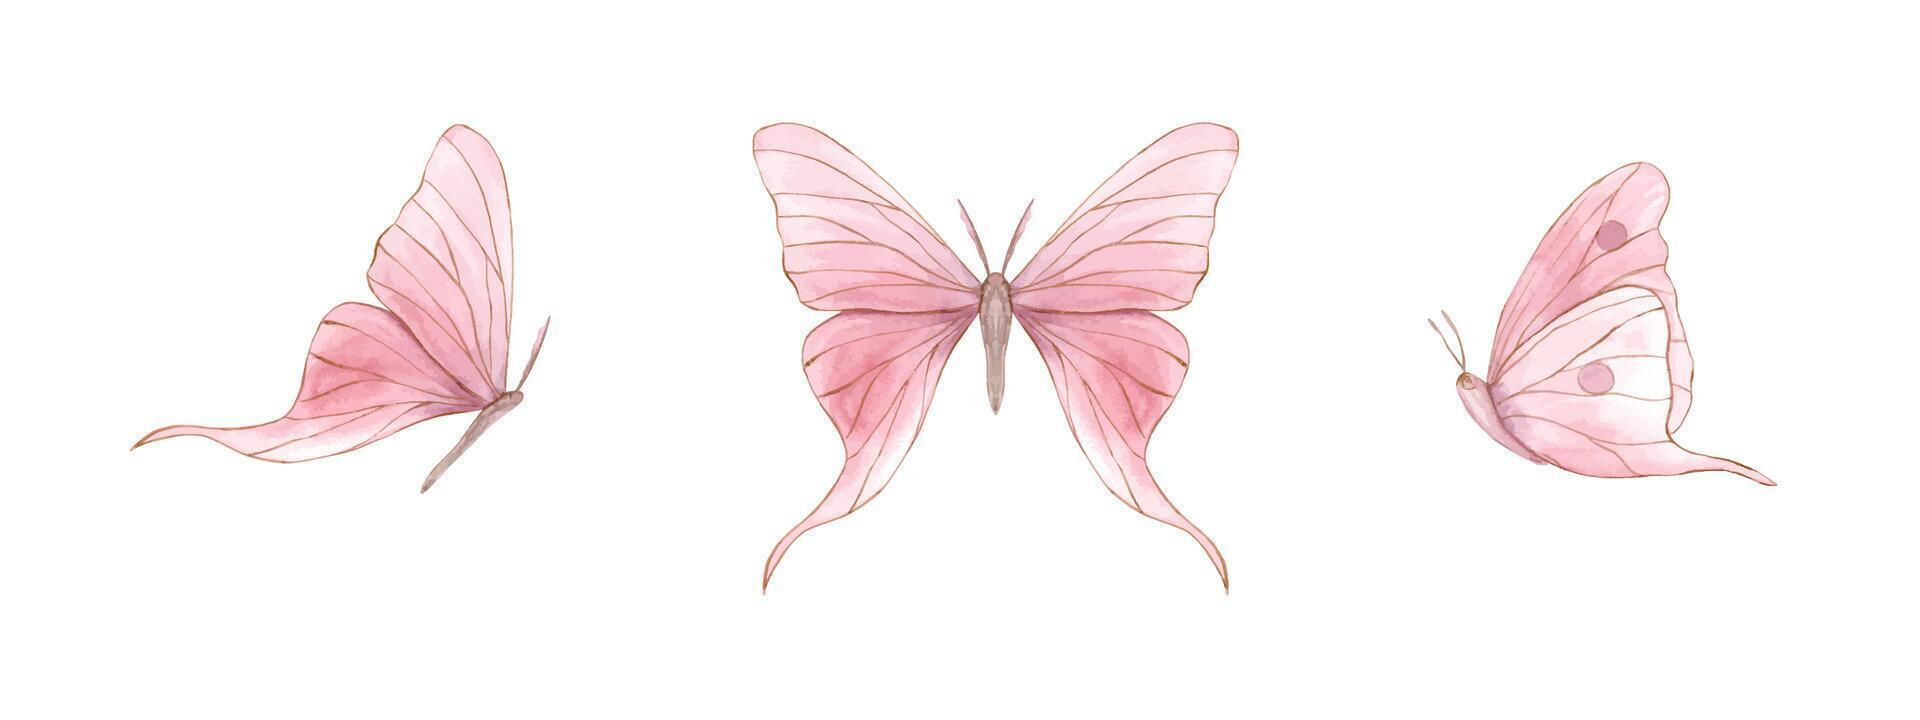 Decorative abstract butterfly. Butterflies set. Pink insects with gold outline. Watercolor illustration of fluttering lepidoptera. For wedding invitations, birthday cards, greetings. vector